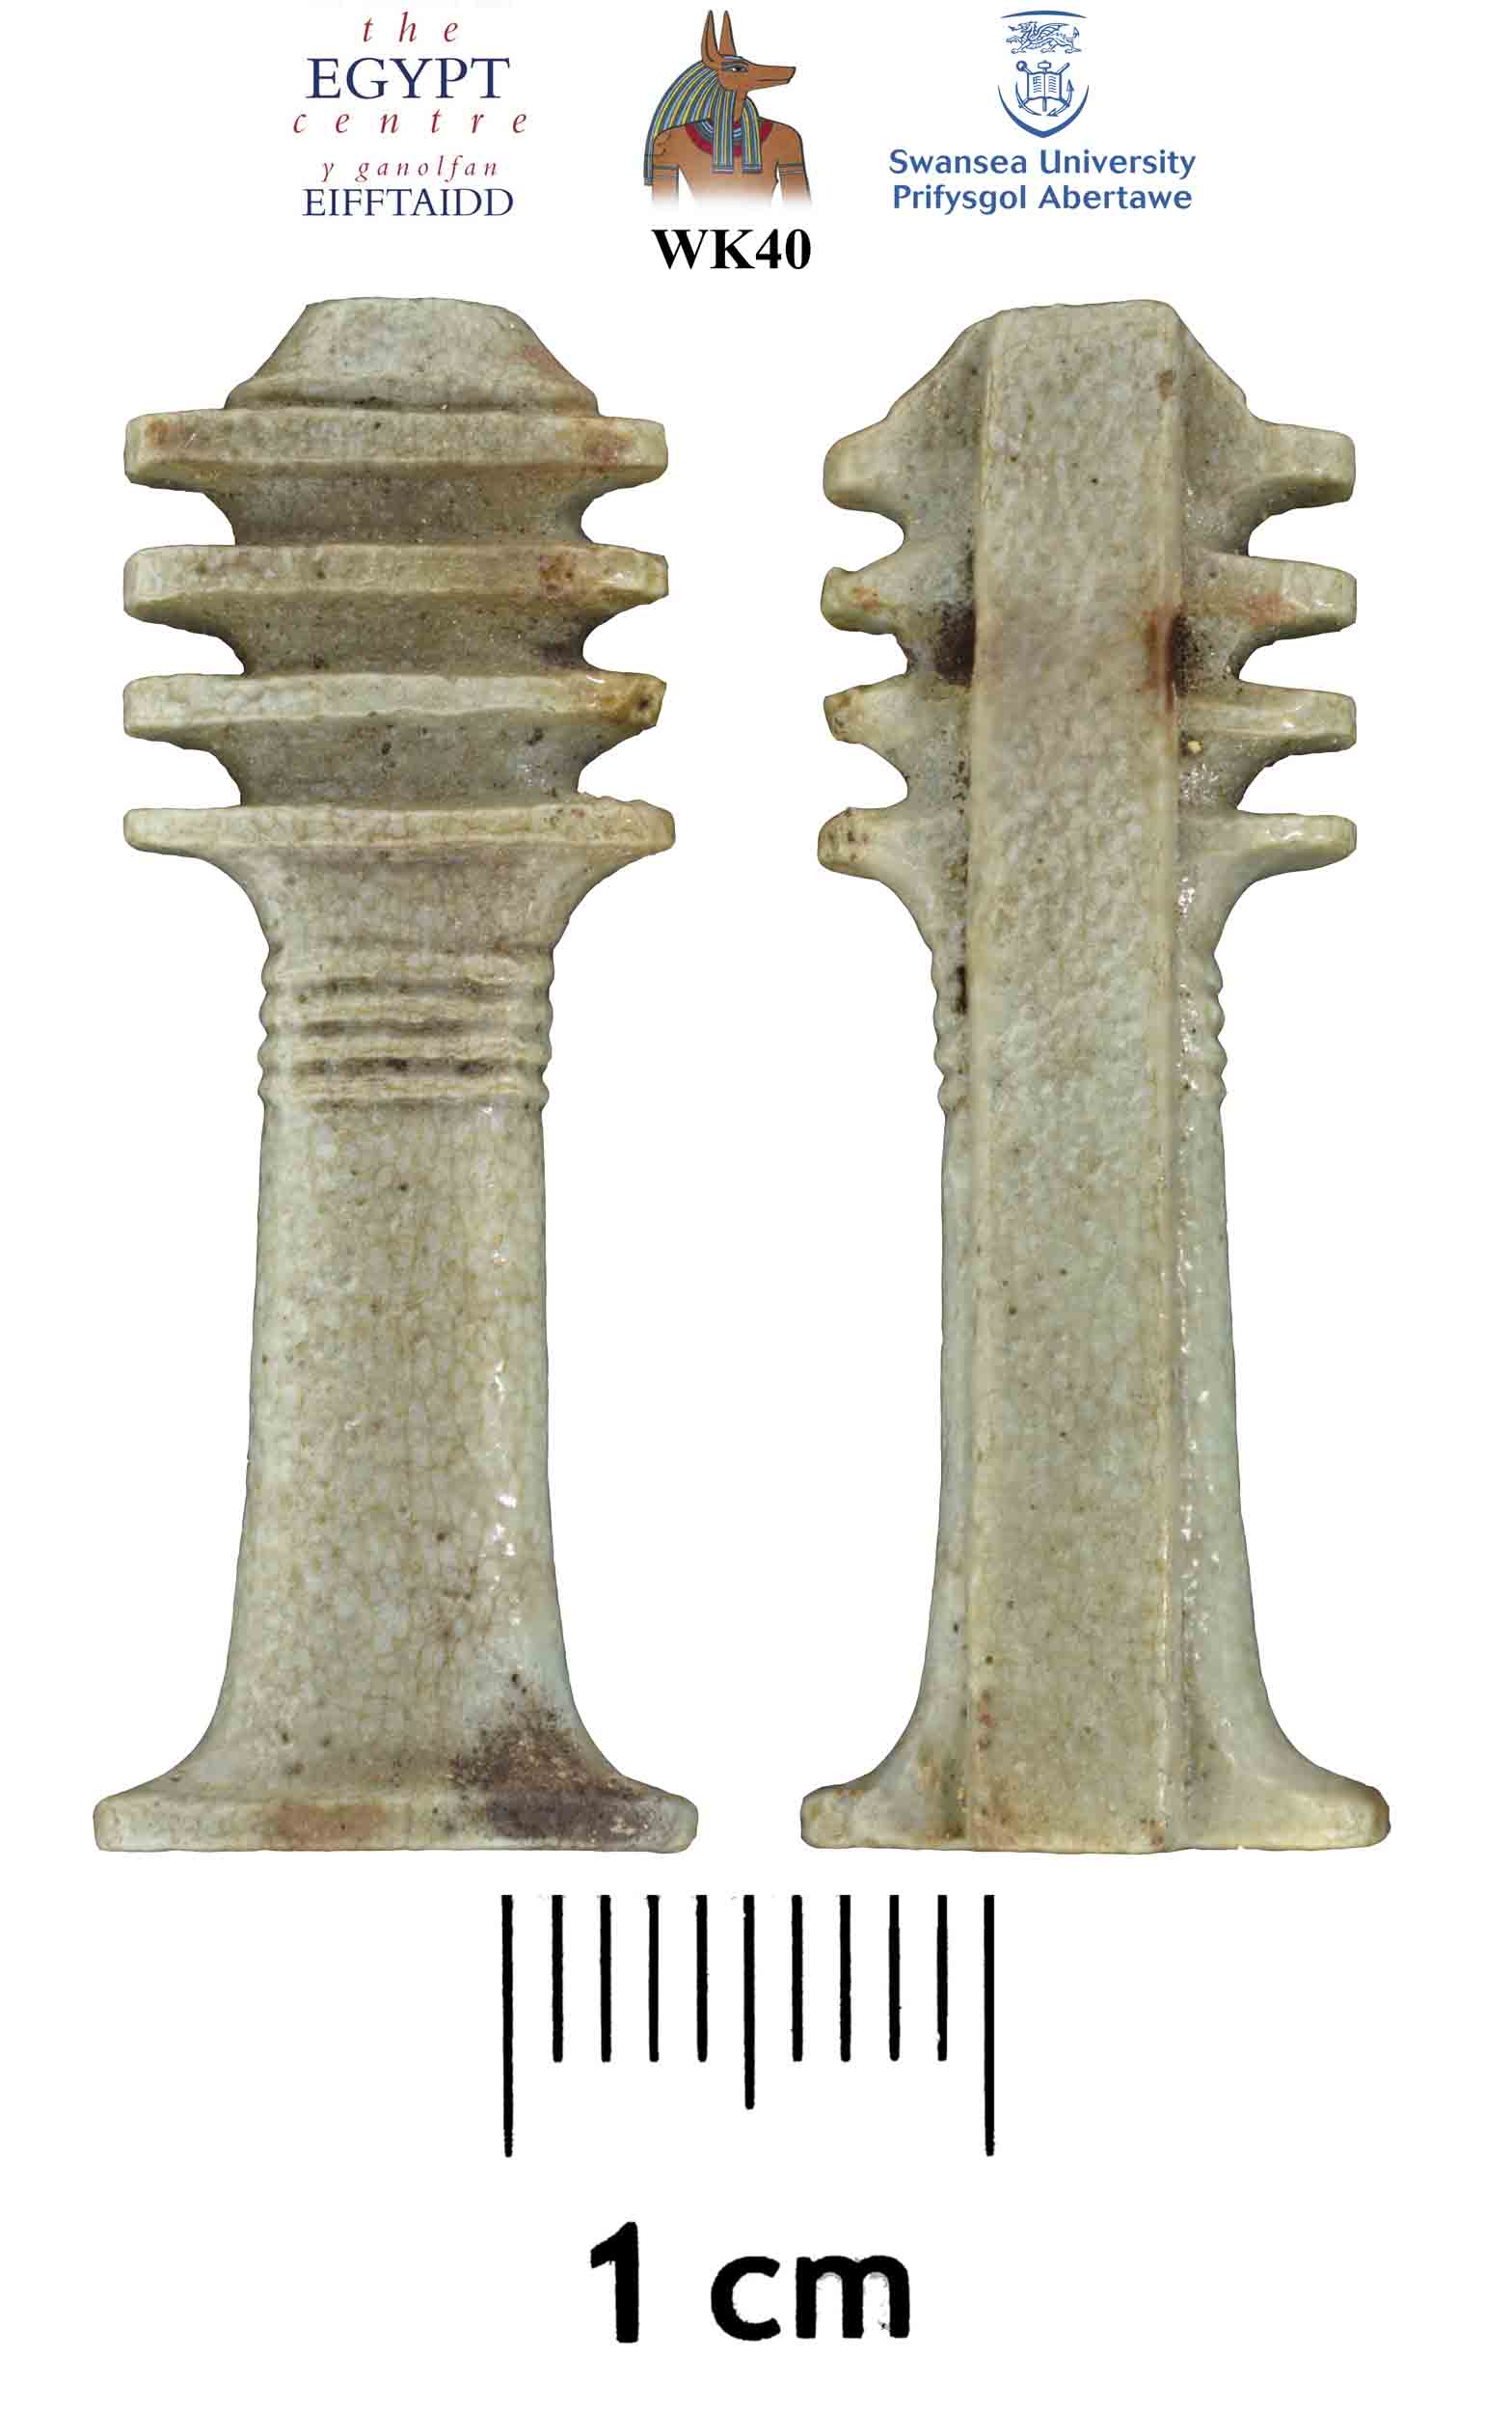 Image for: Amulet of a djed pillar